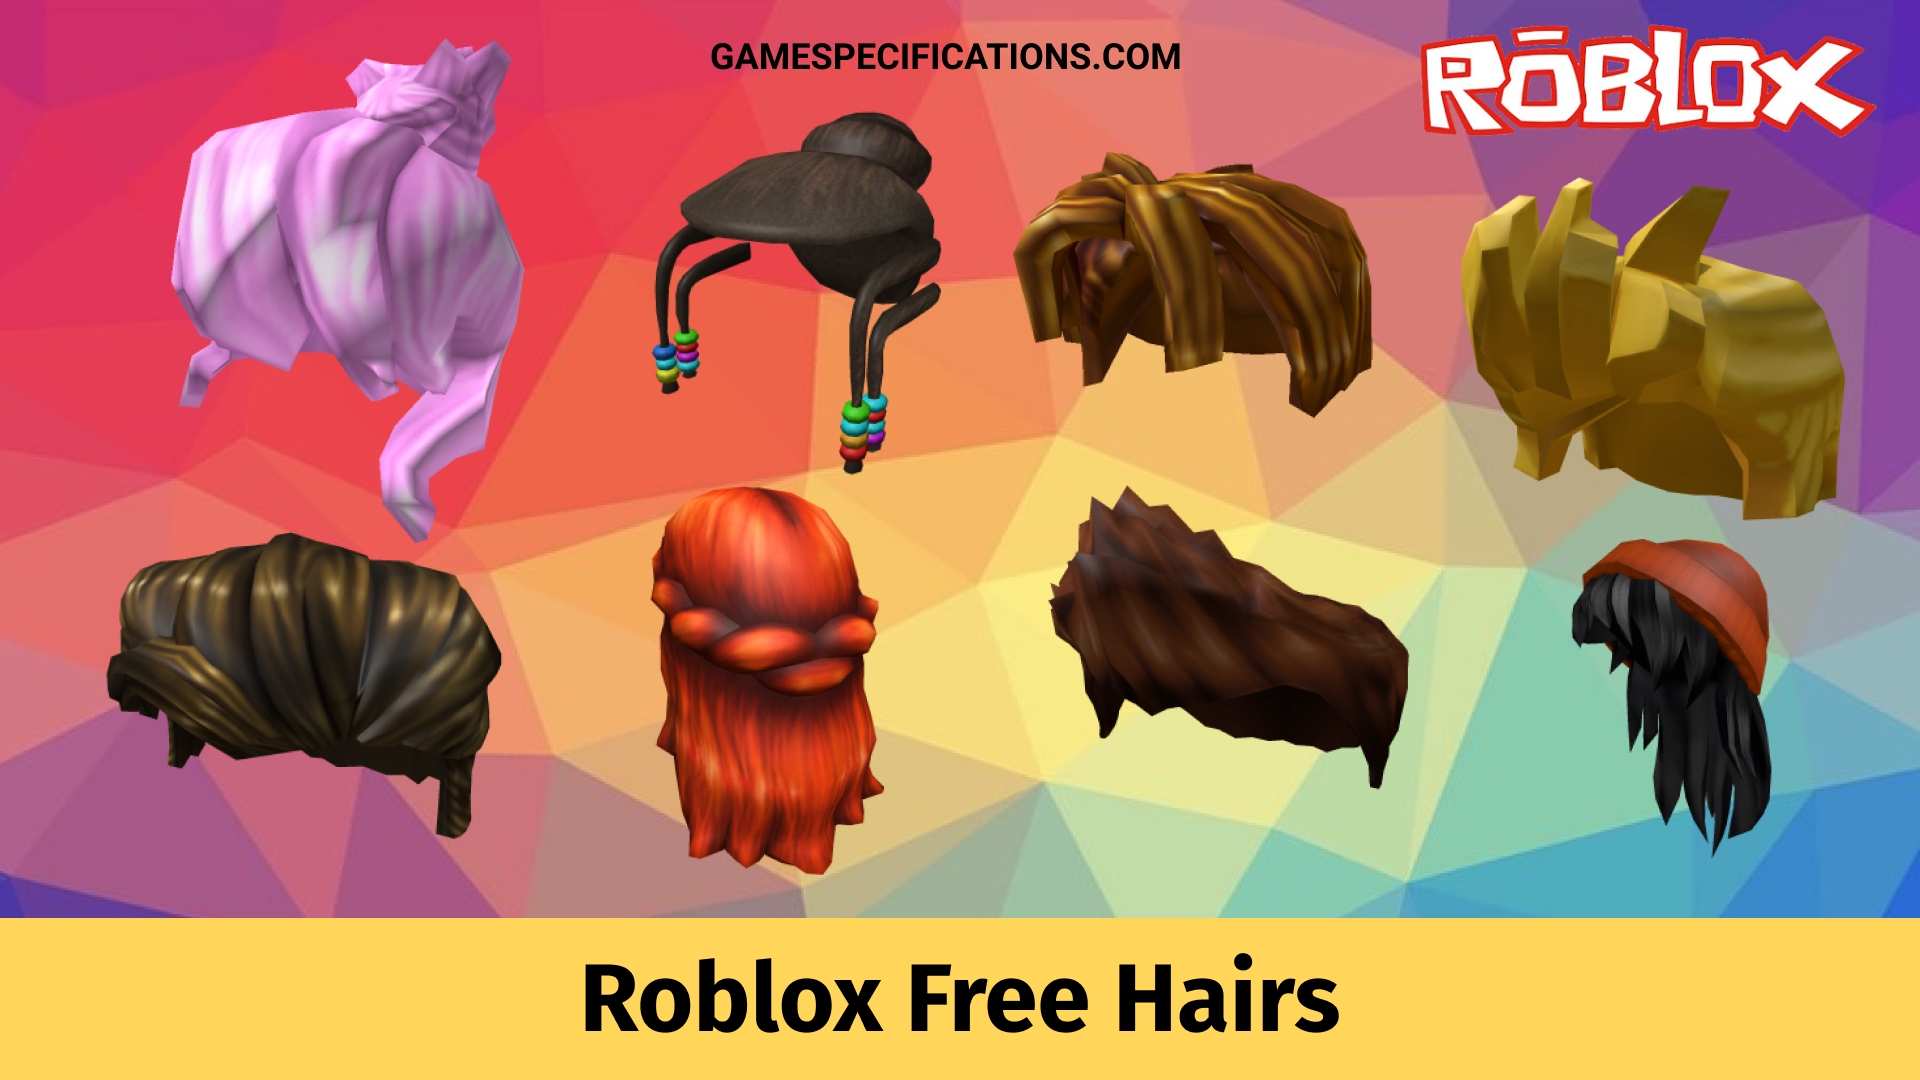 Roblox Free Hairs For Awesome Aesthetics Game Specifications - all free hair in roblox